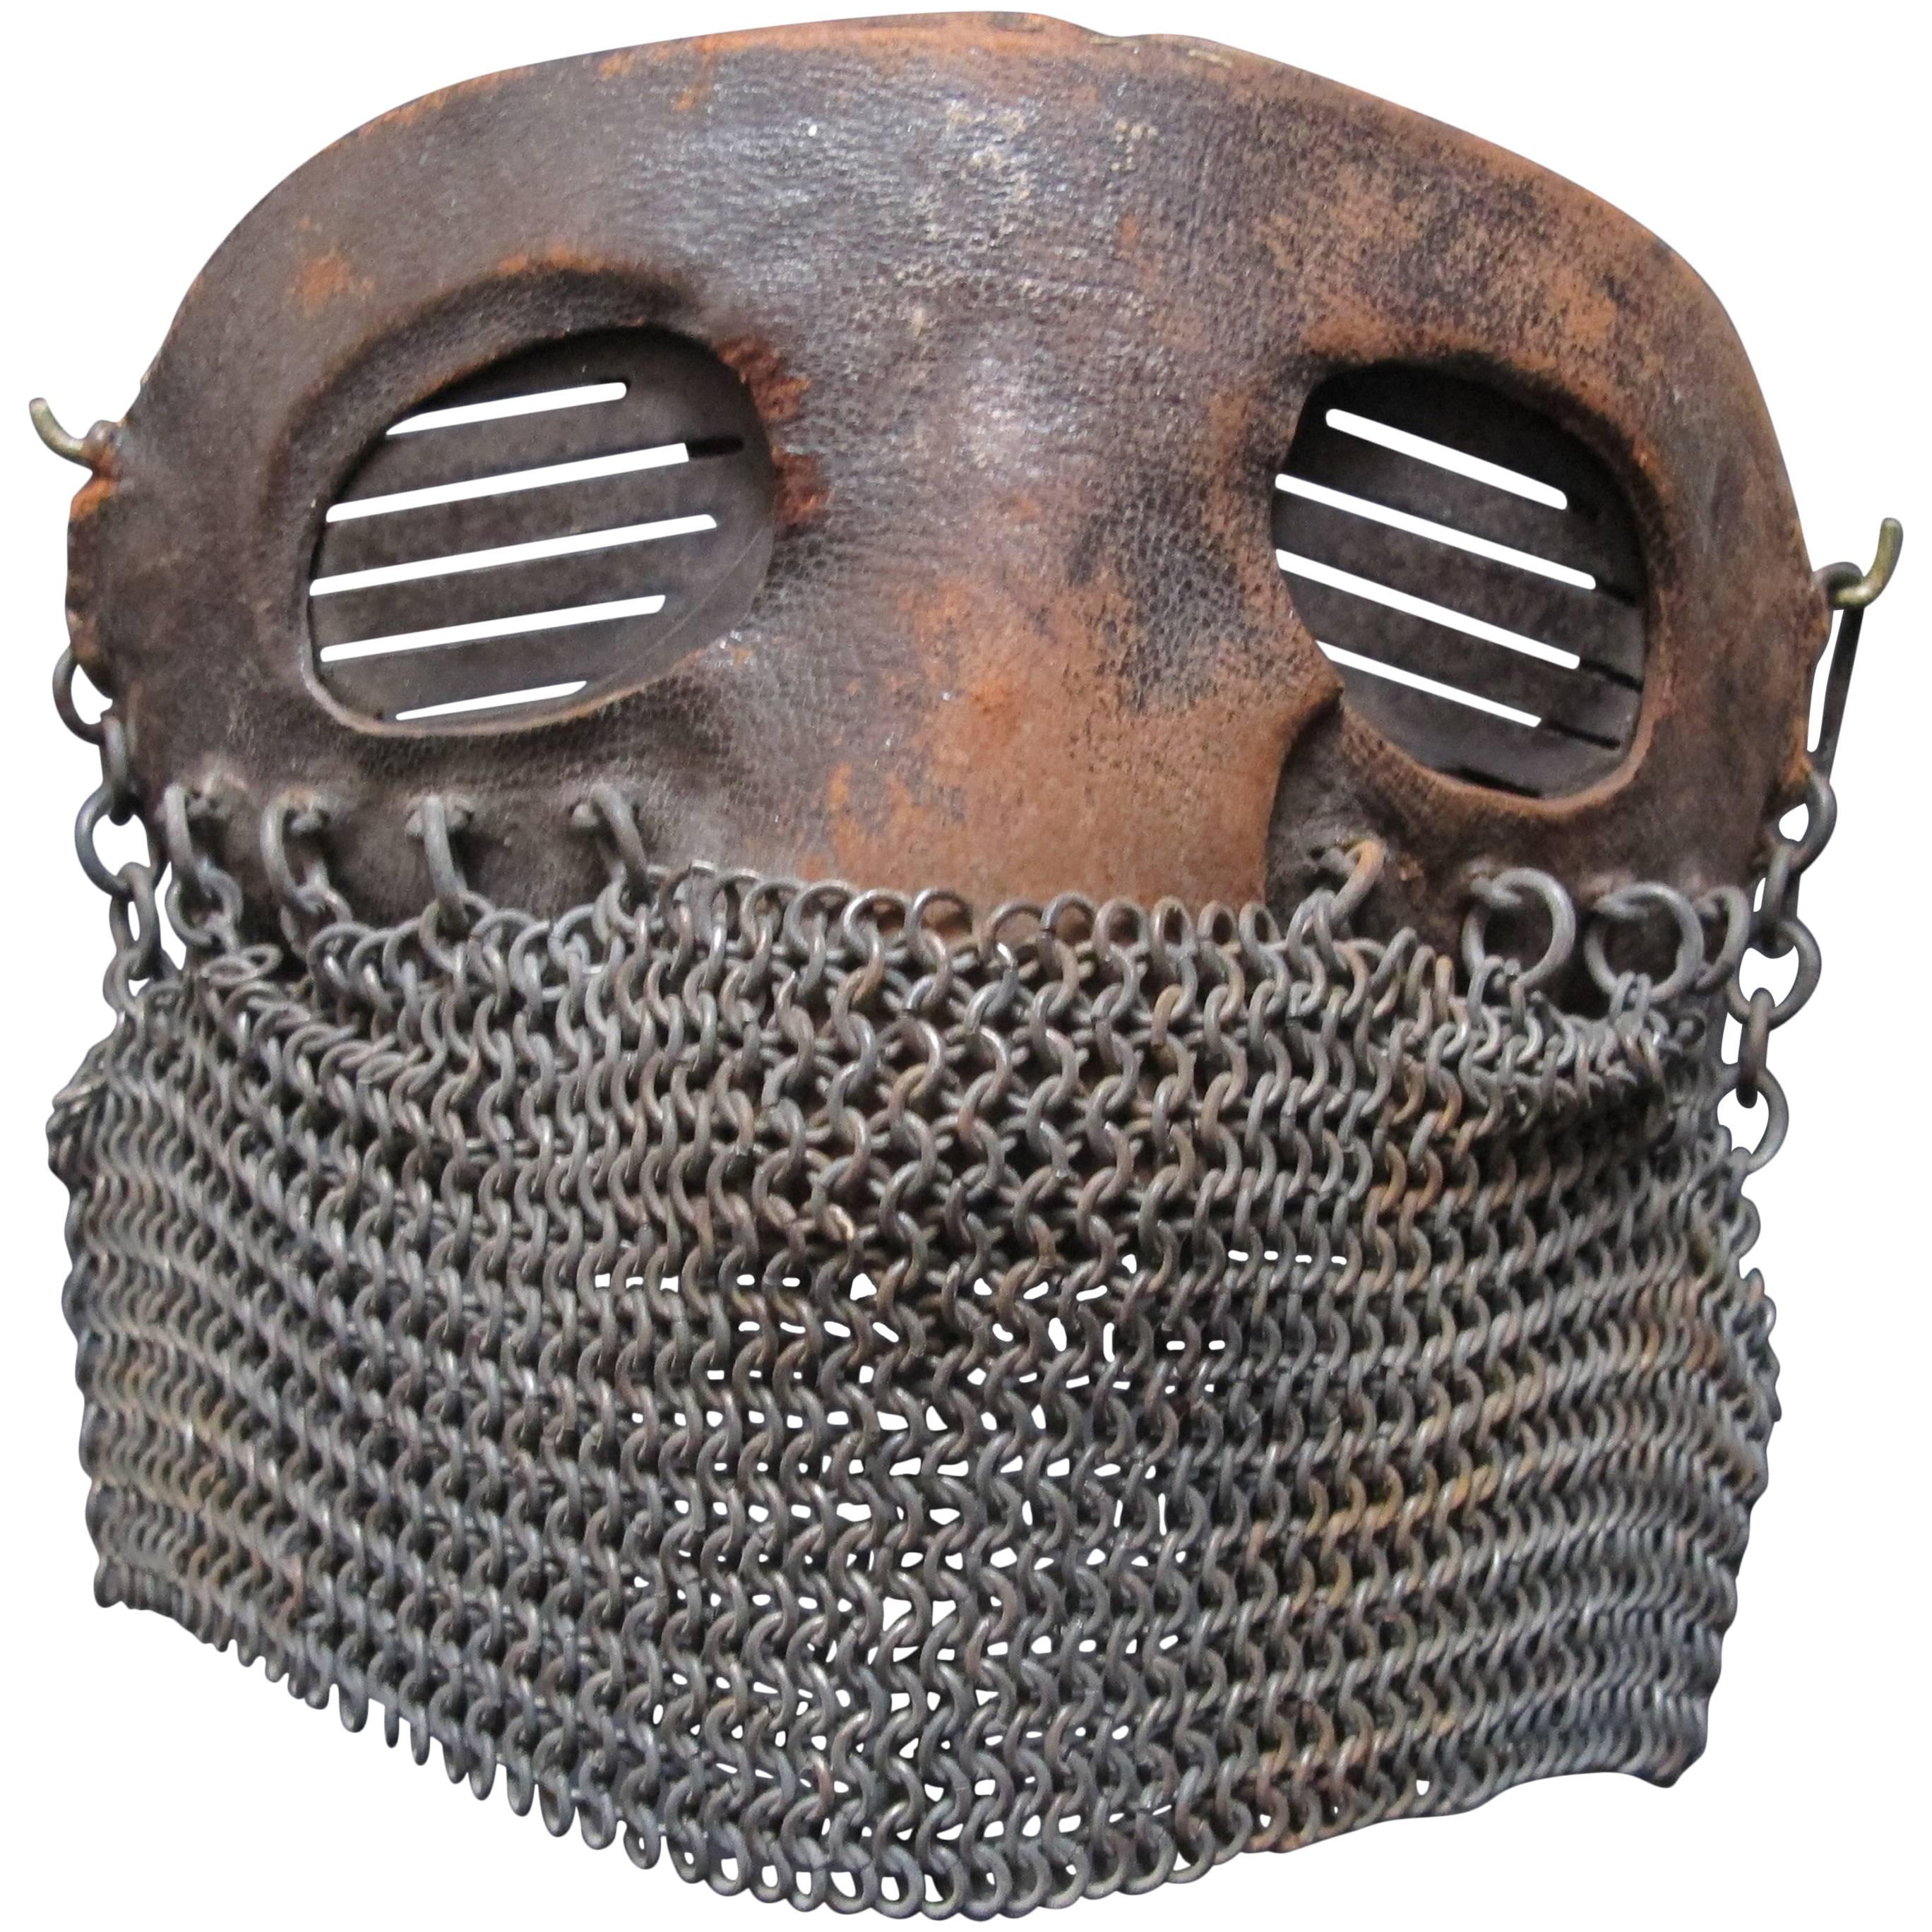 Tank Operators Mask from WWI of Iron Leather and Chain Mail